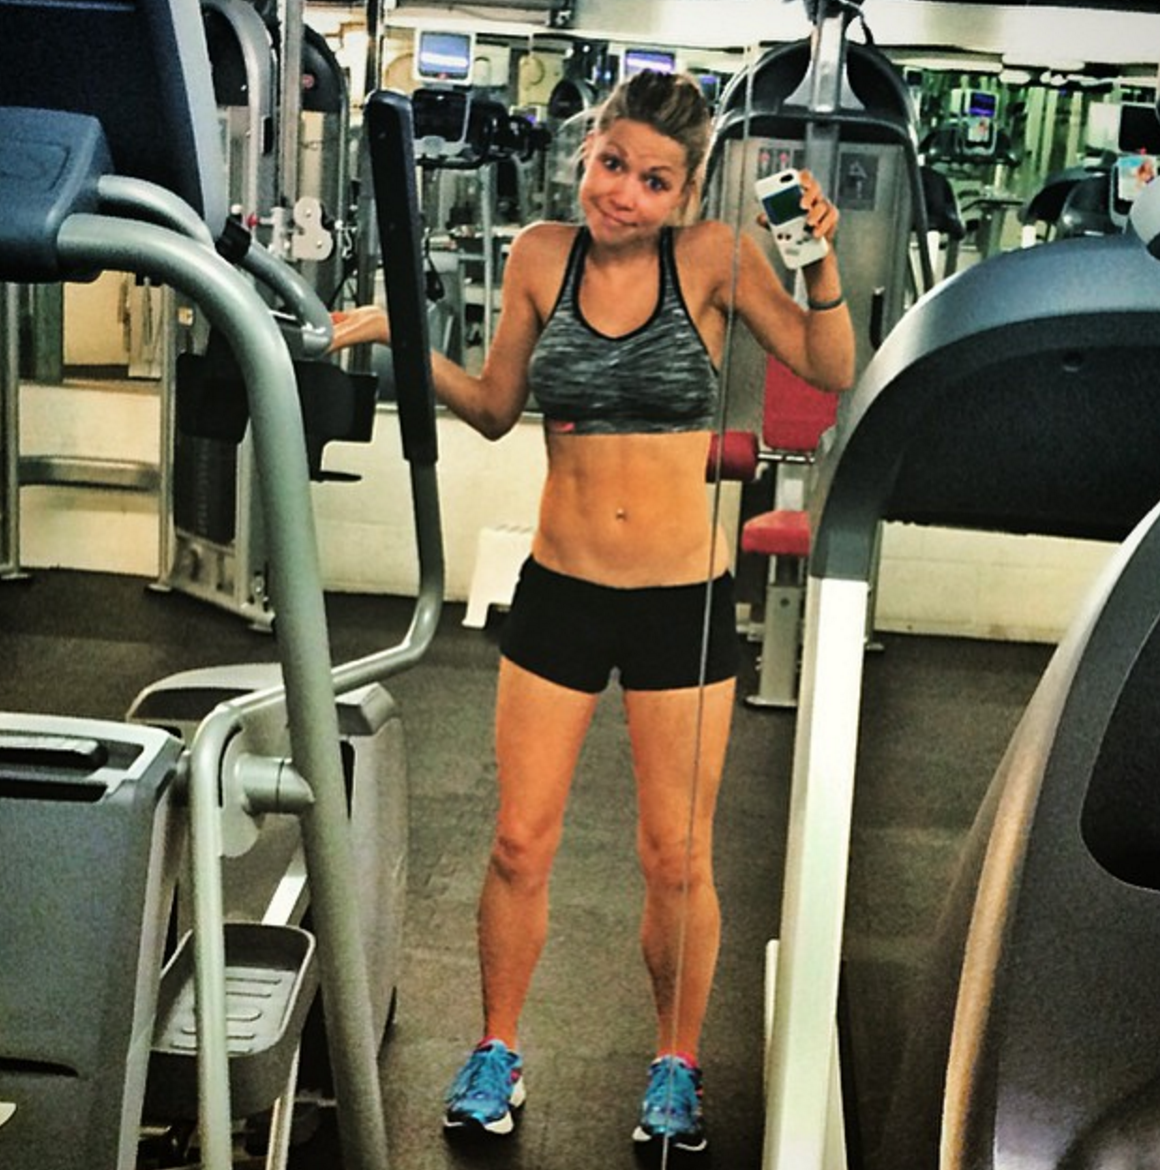 GiGi Dubois in the gym in a sports bra and shorts